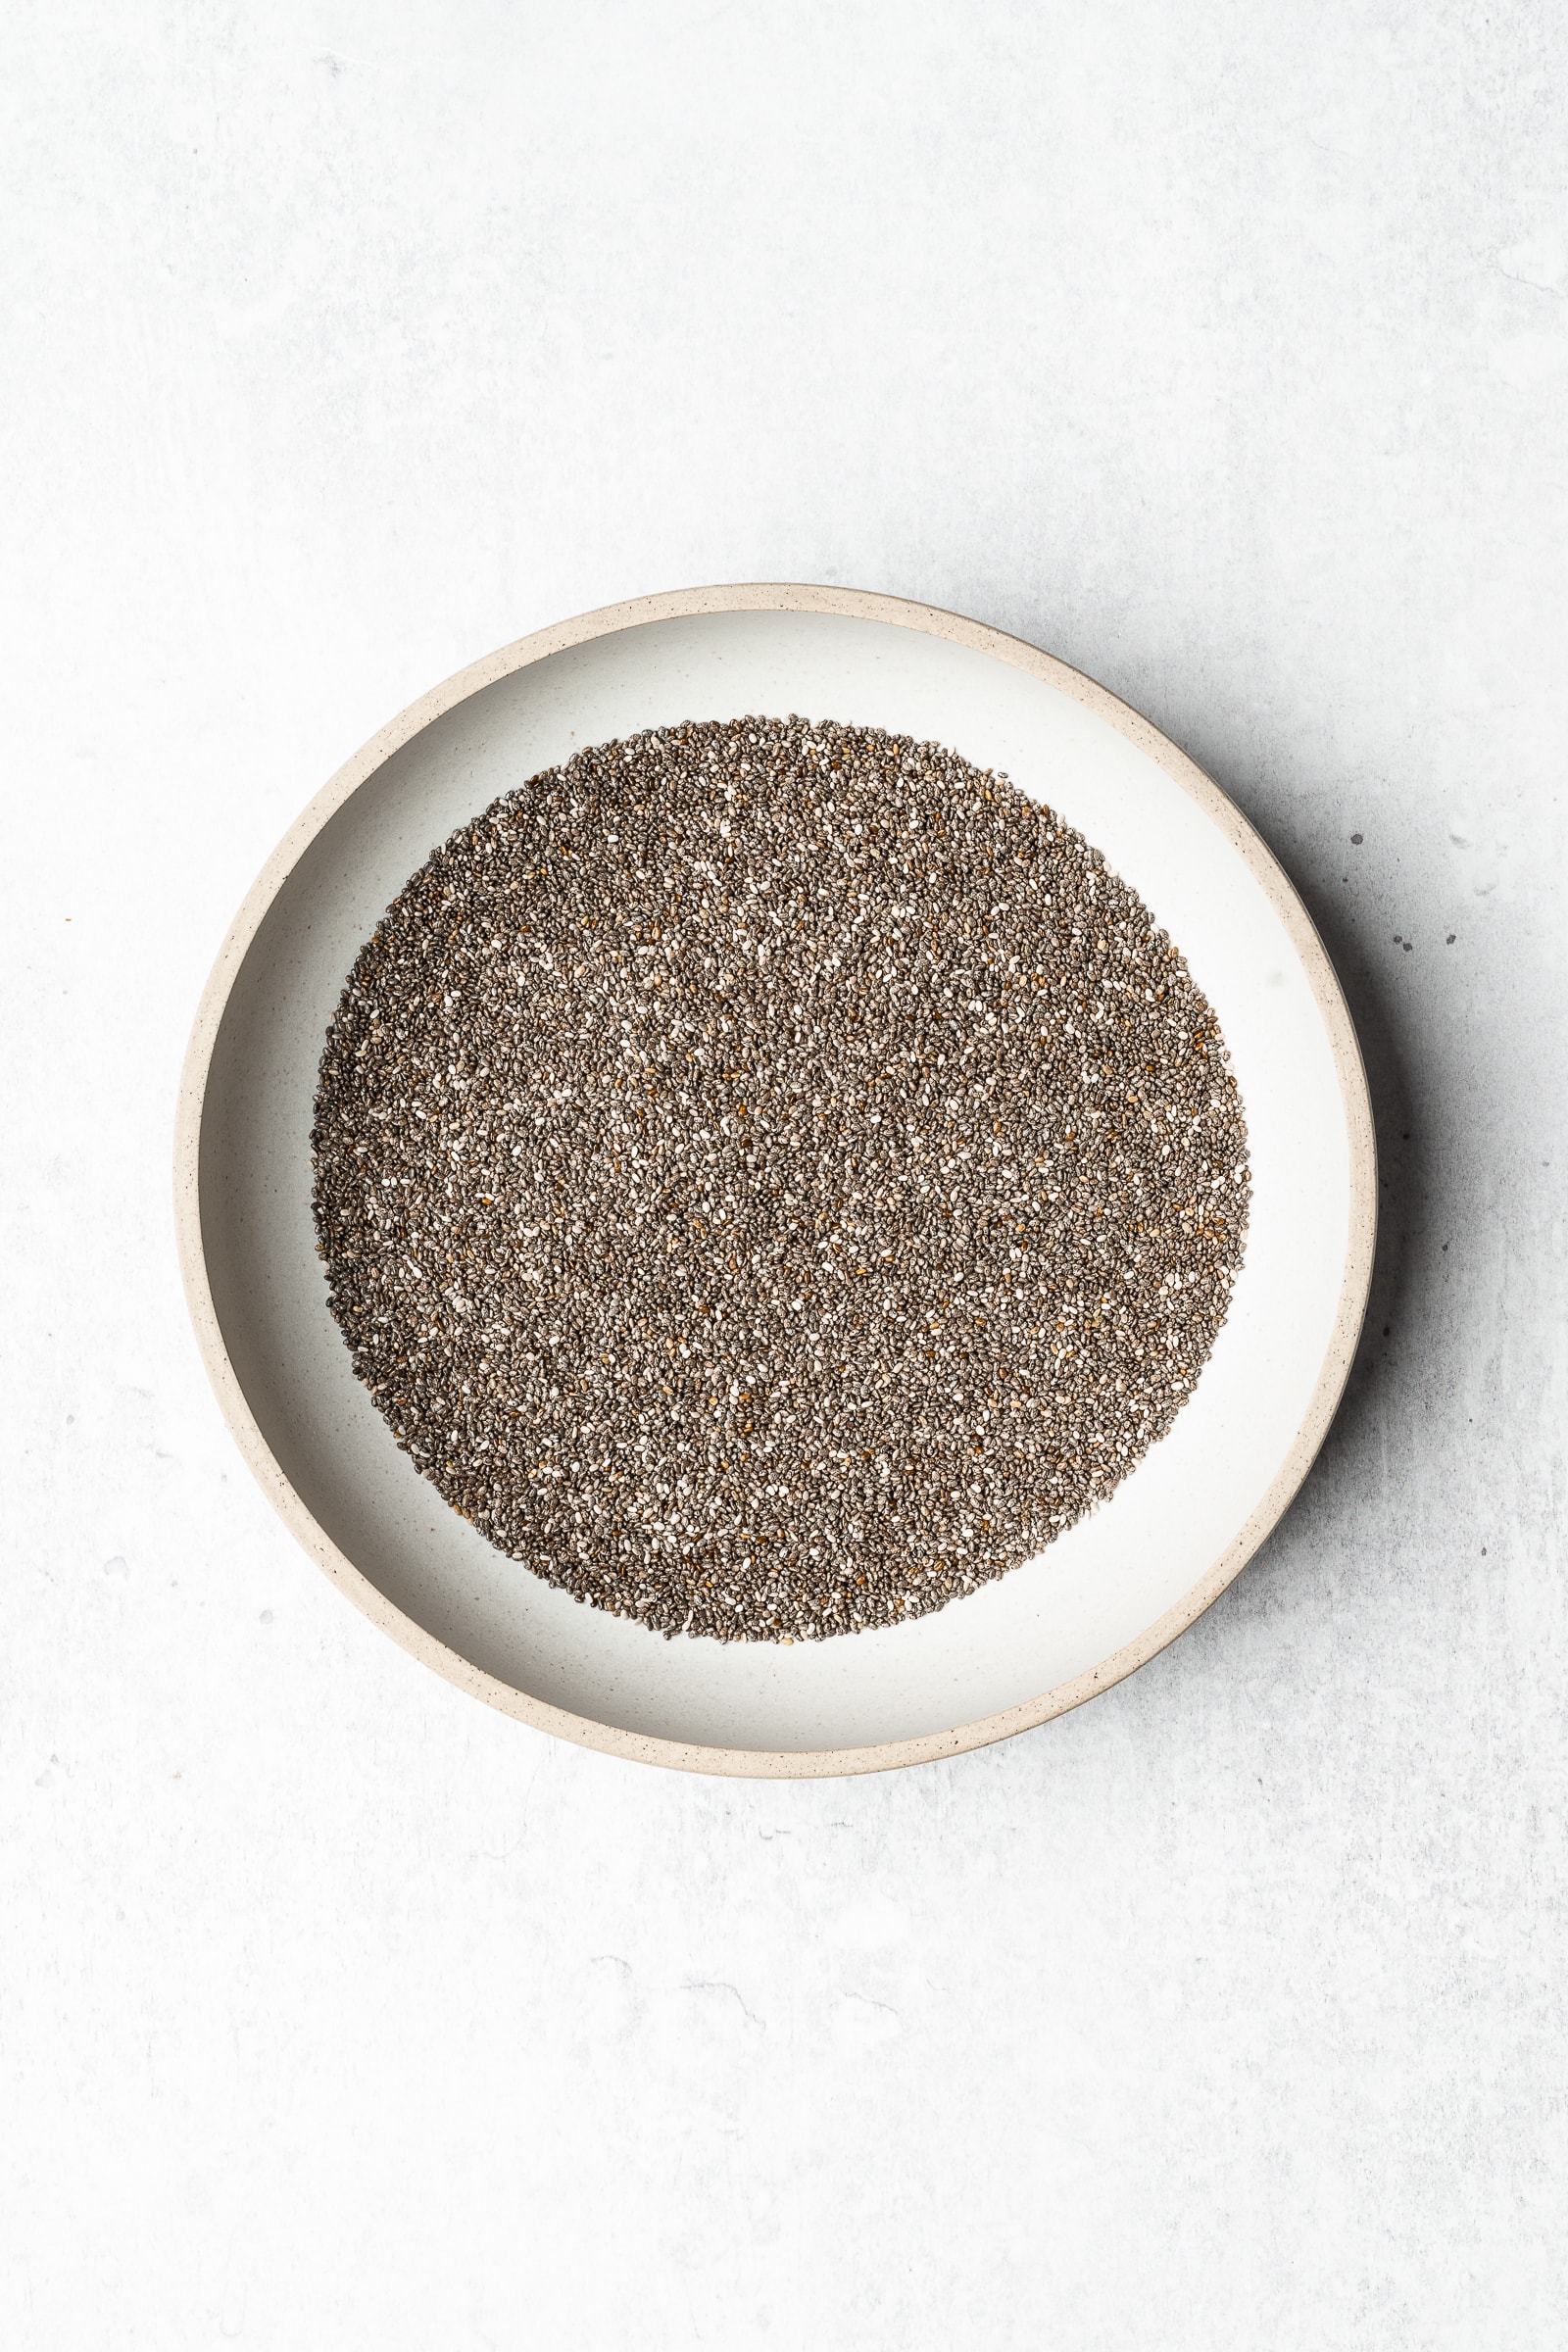 Chia seeds in a shallow bowl.